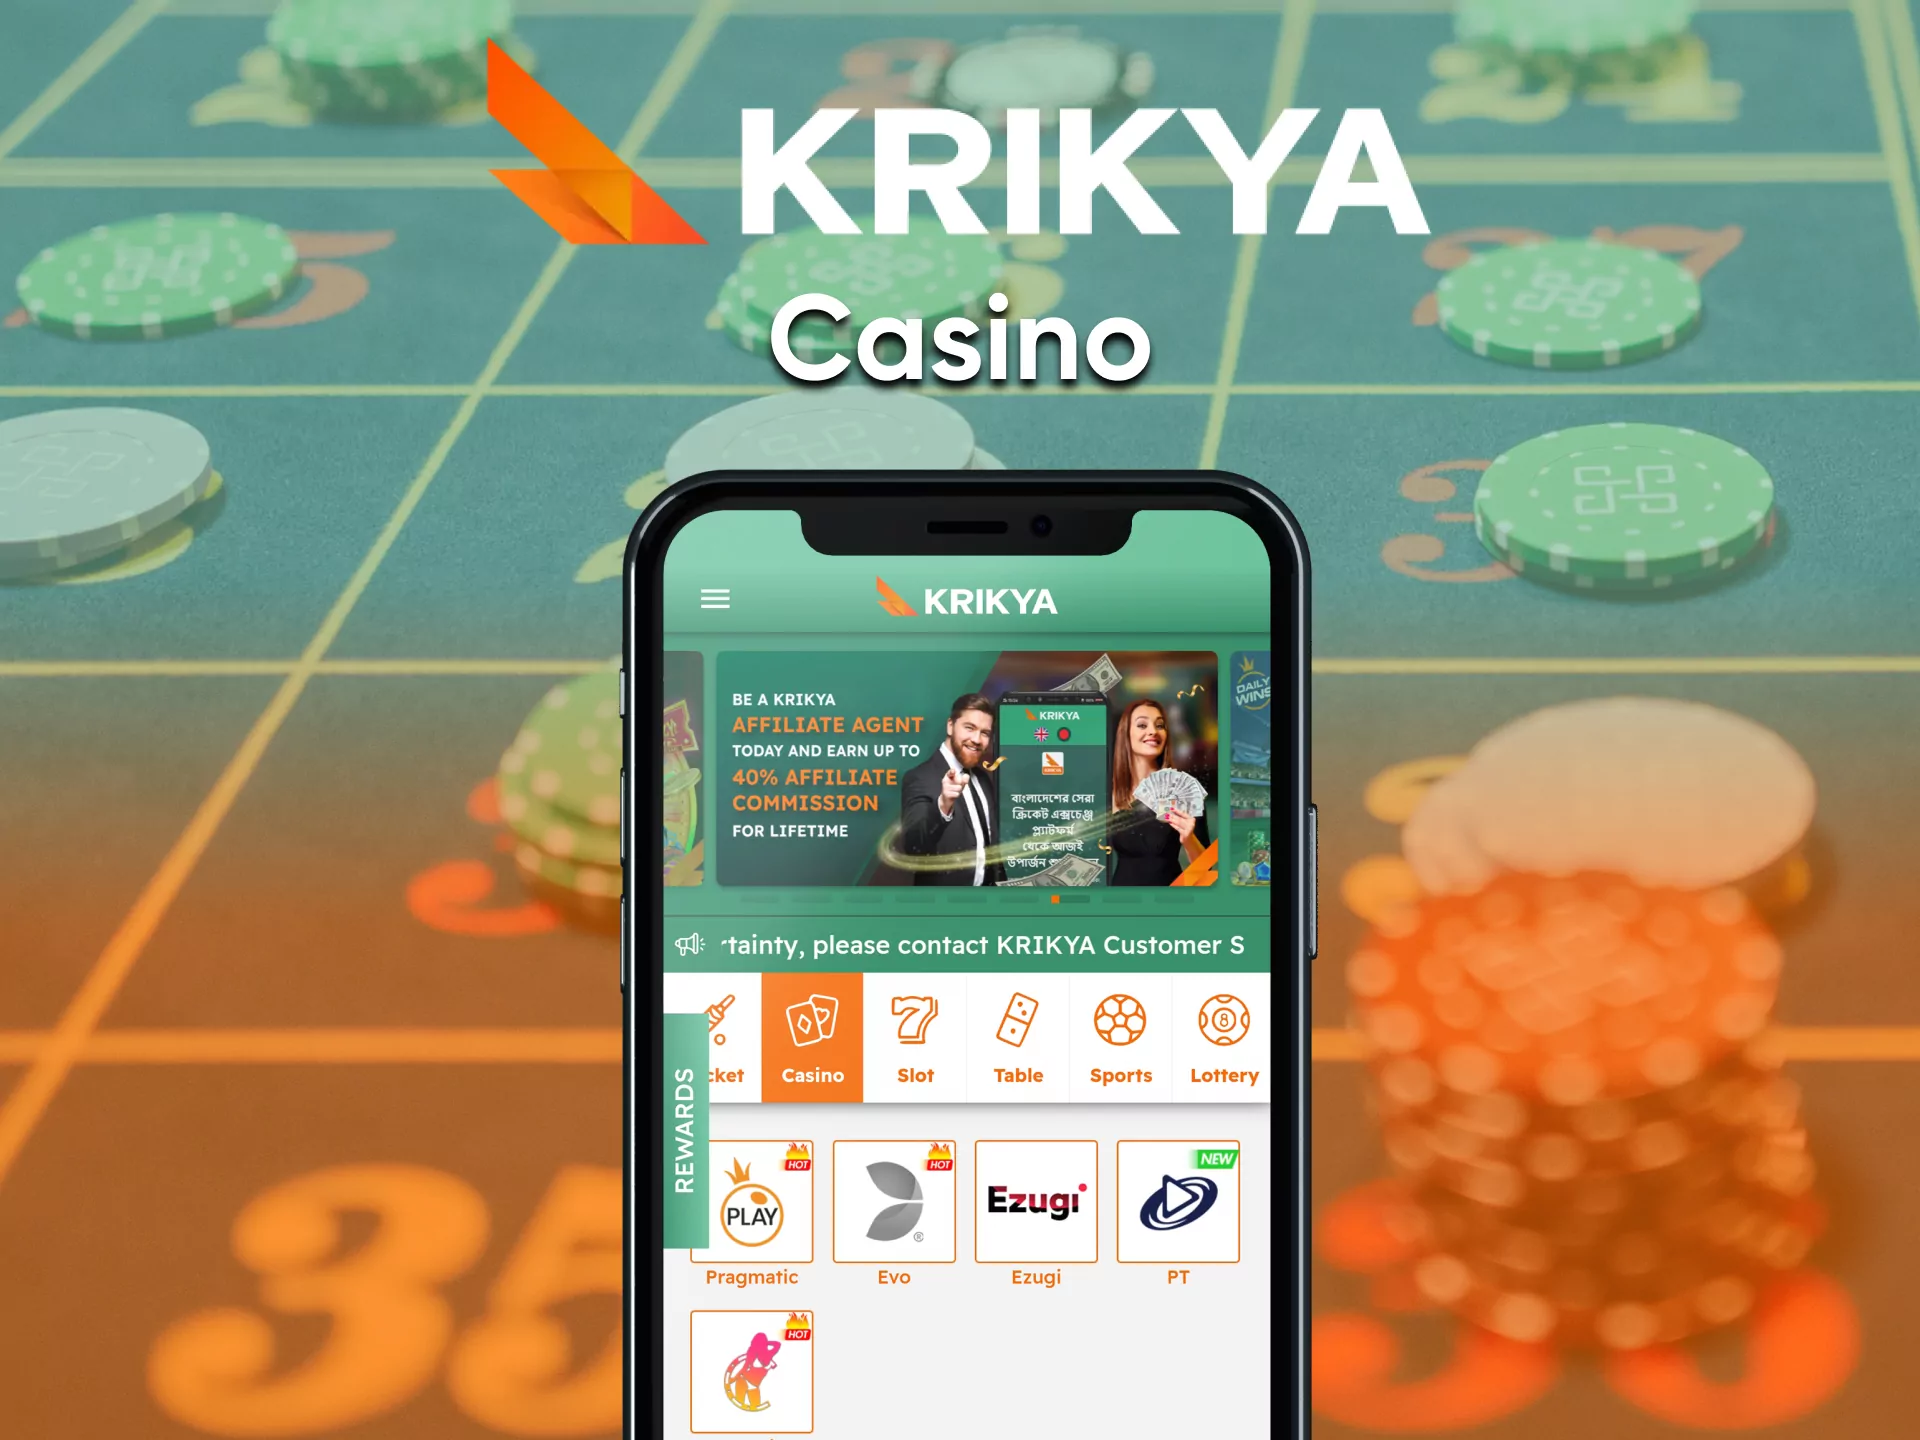 In the Krikya app, you can play in the casino.